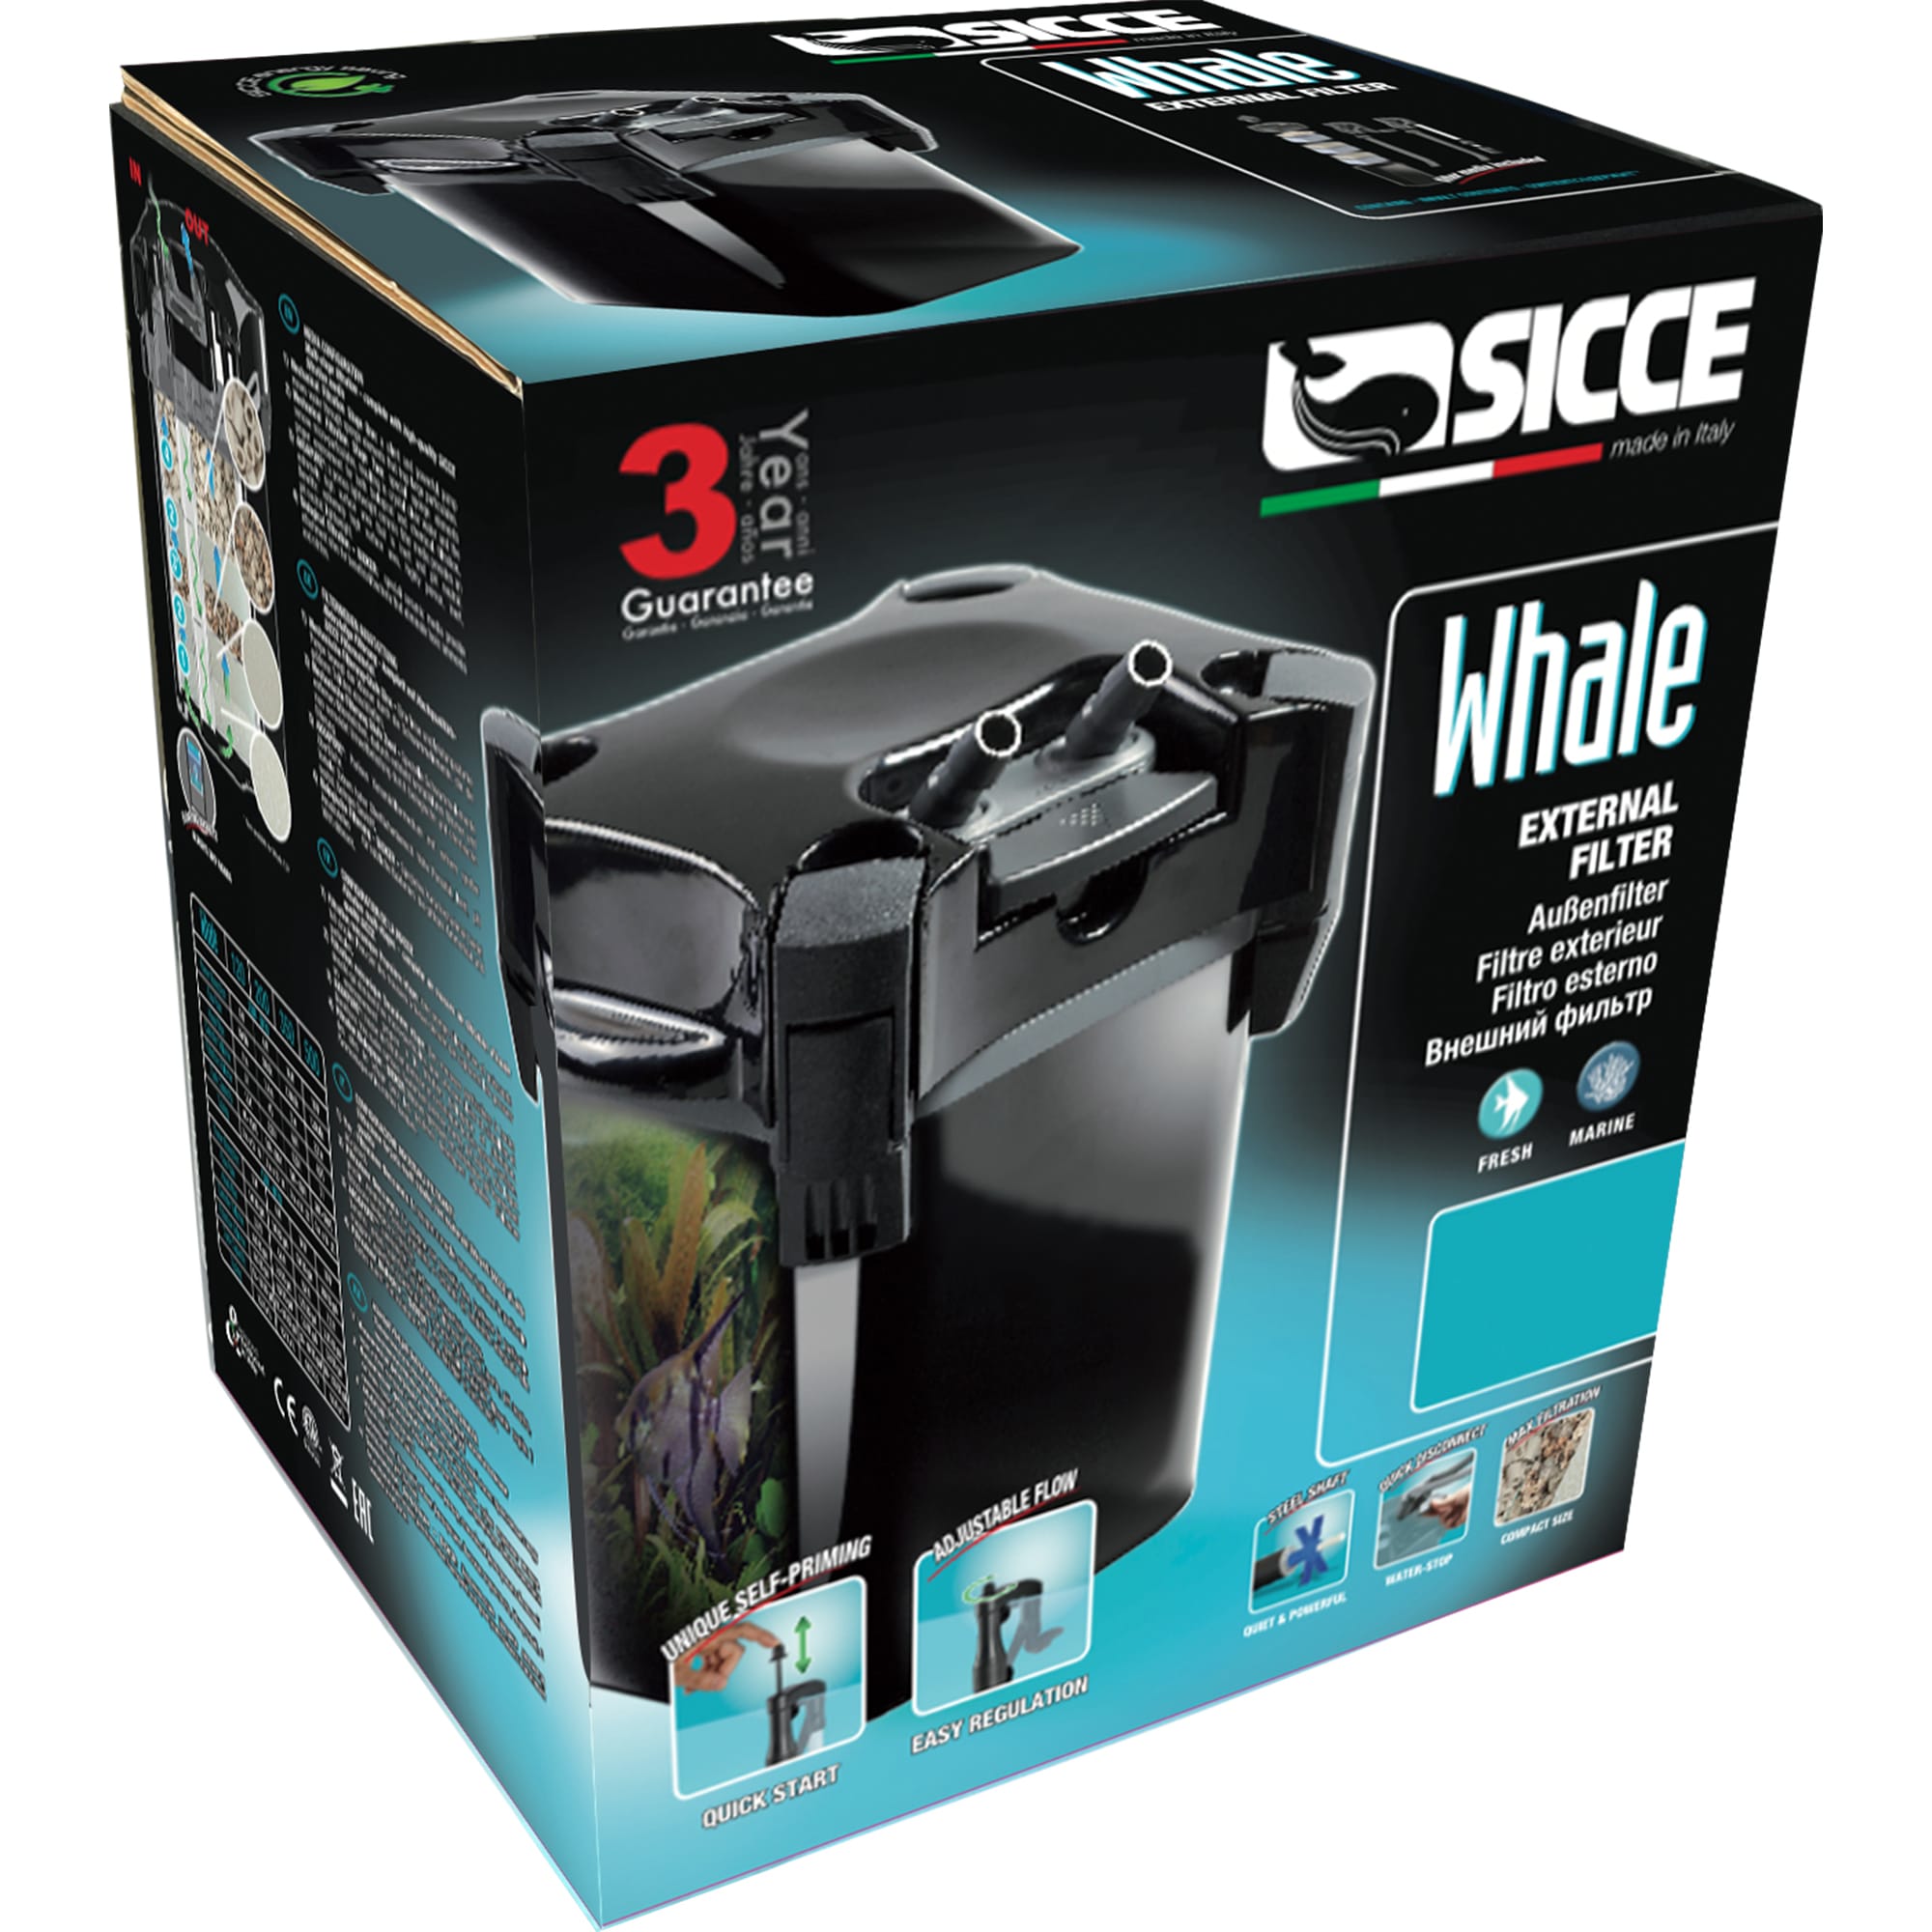 Sicce Whale 120 Canister Filter